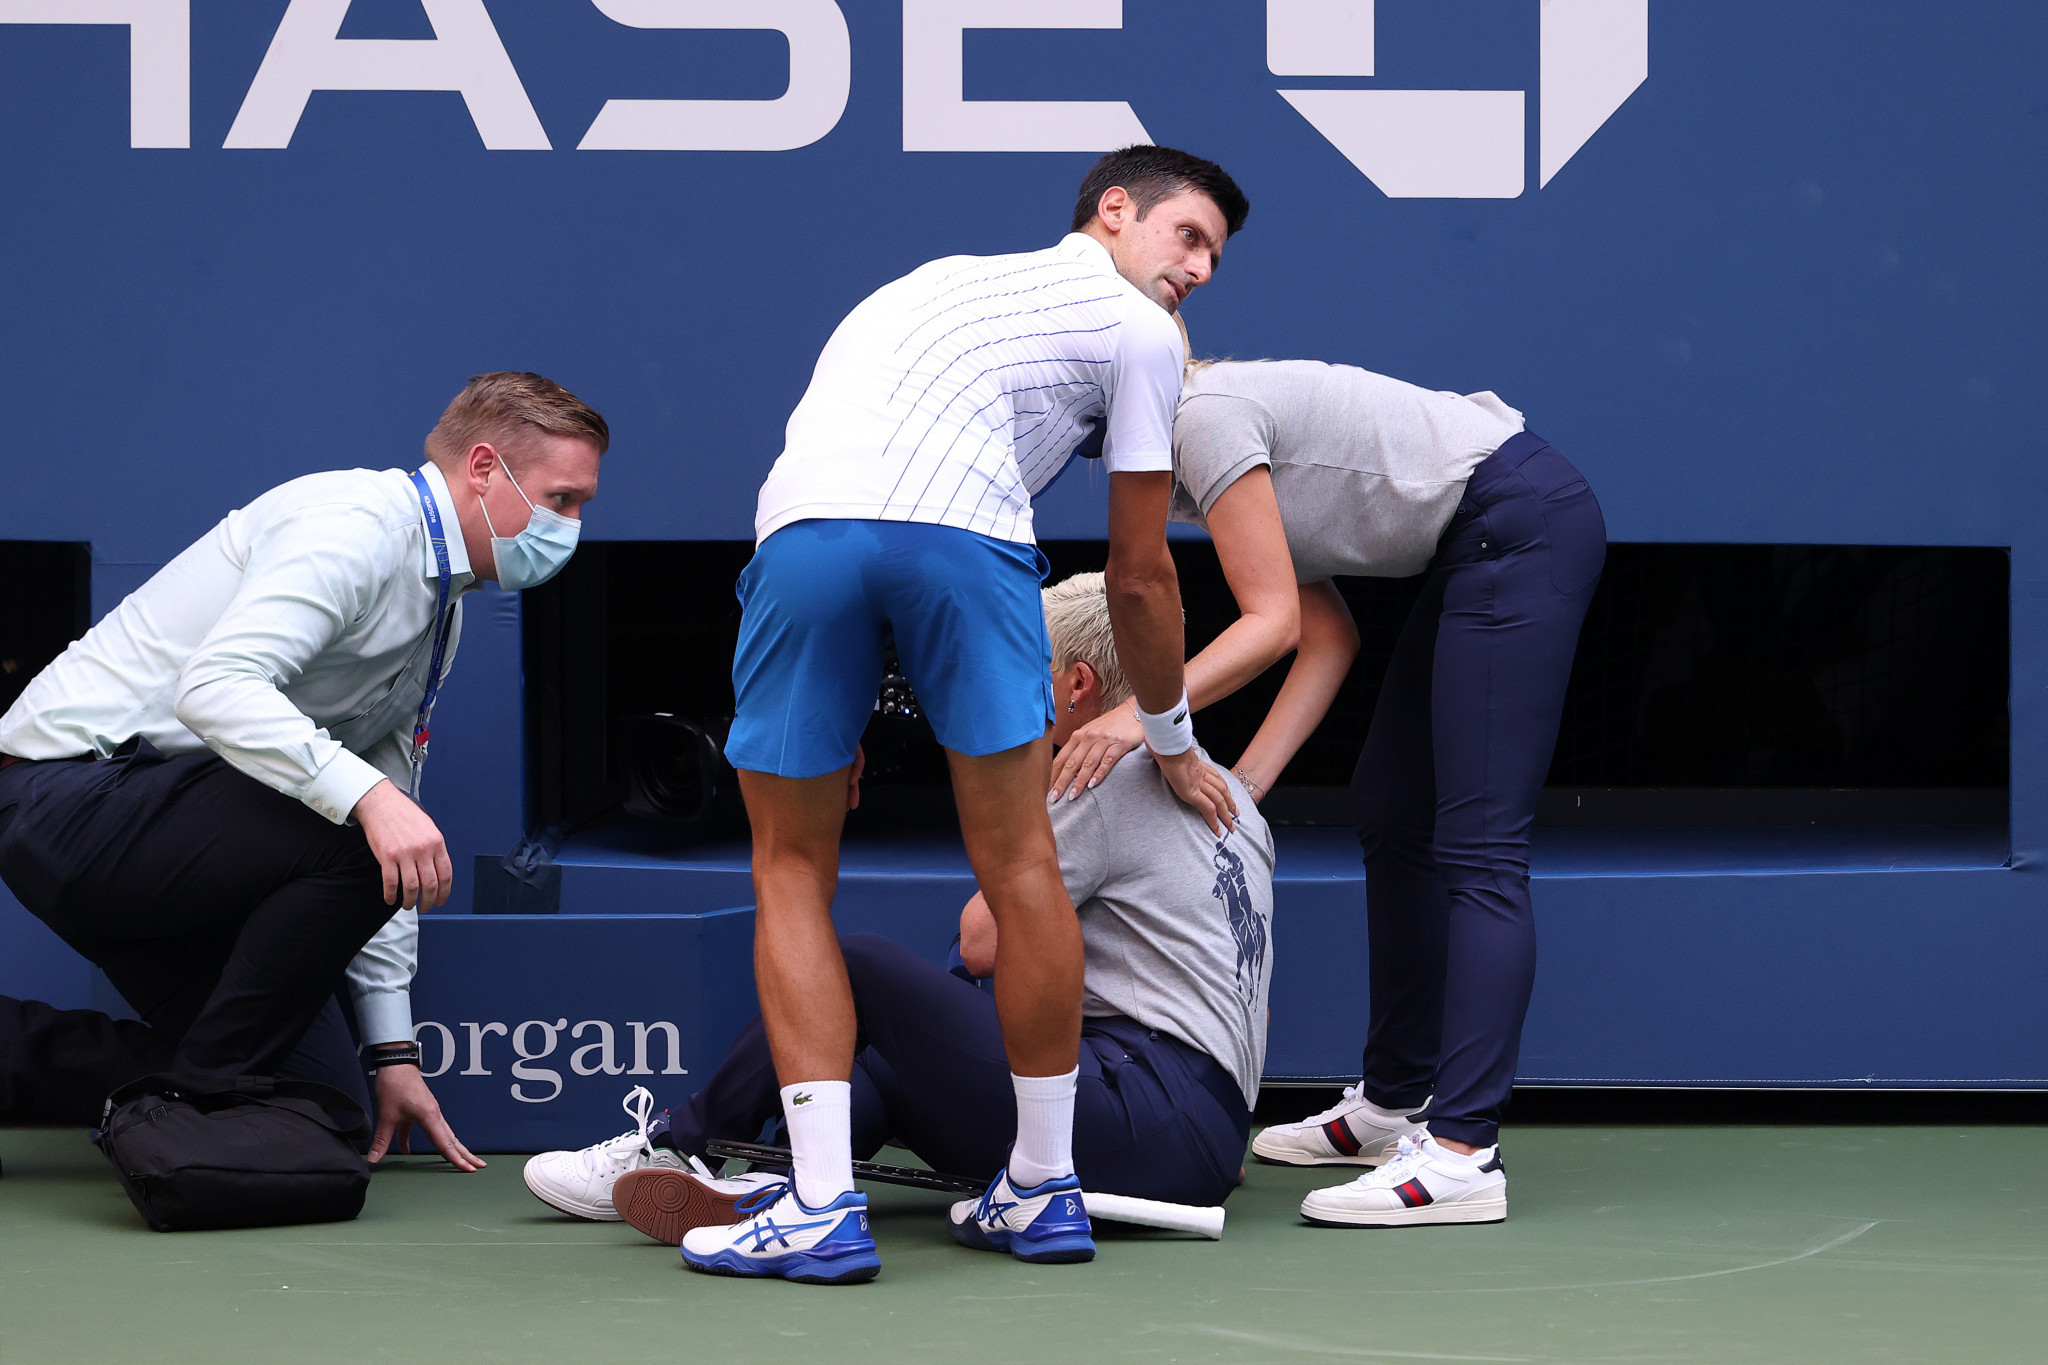 Djokovic disqualified from US Open as more women's seeds lose